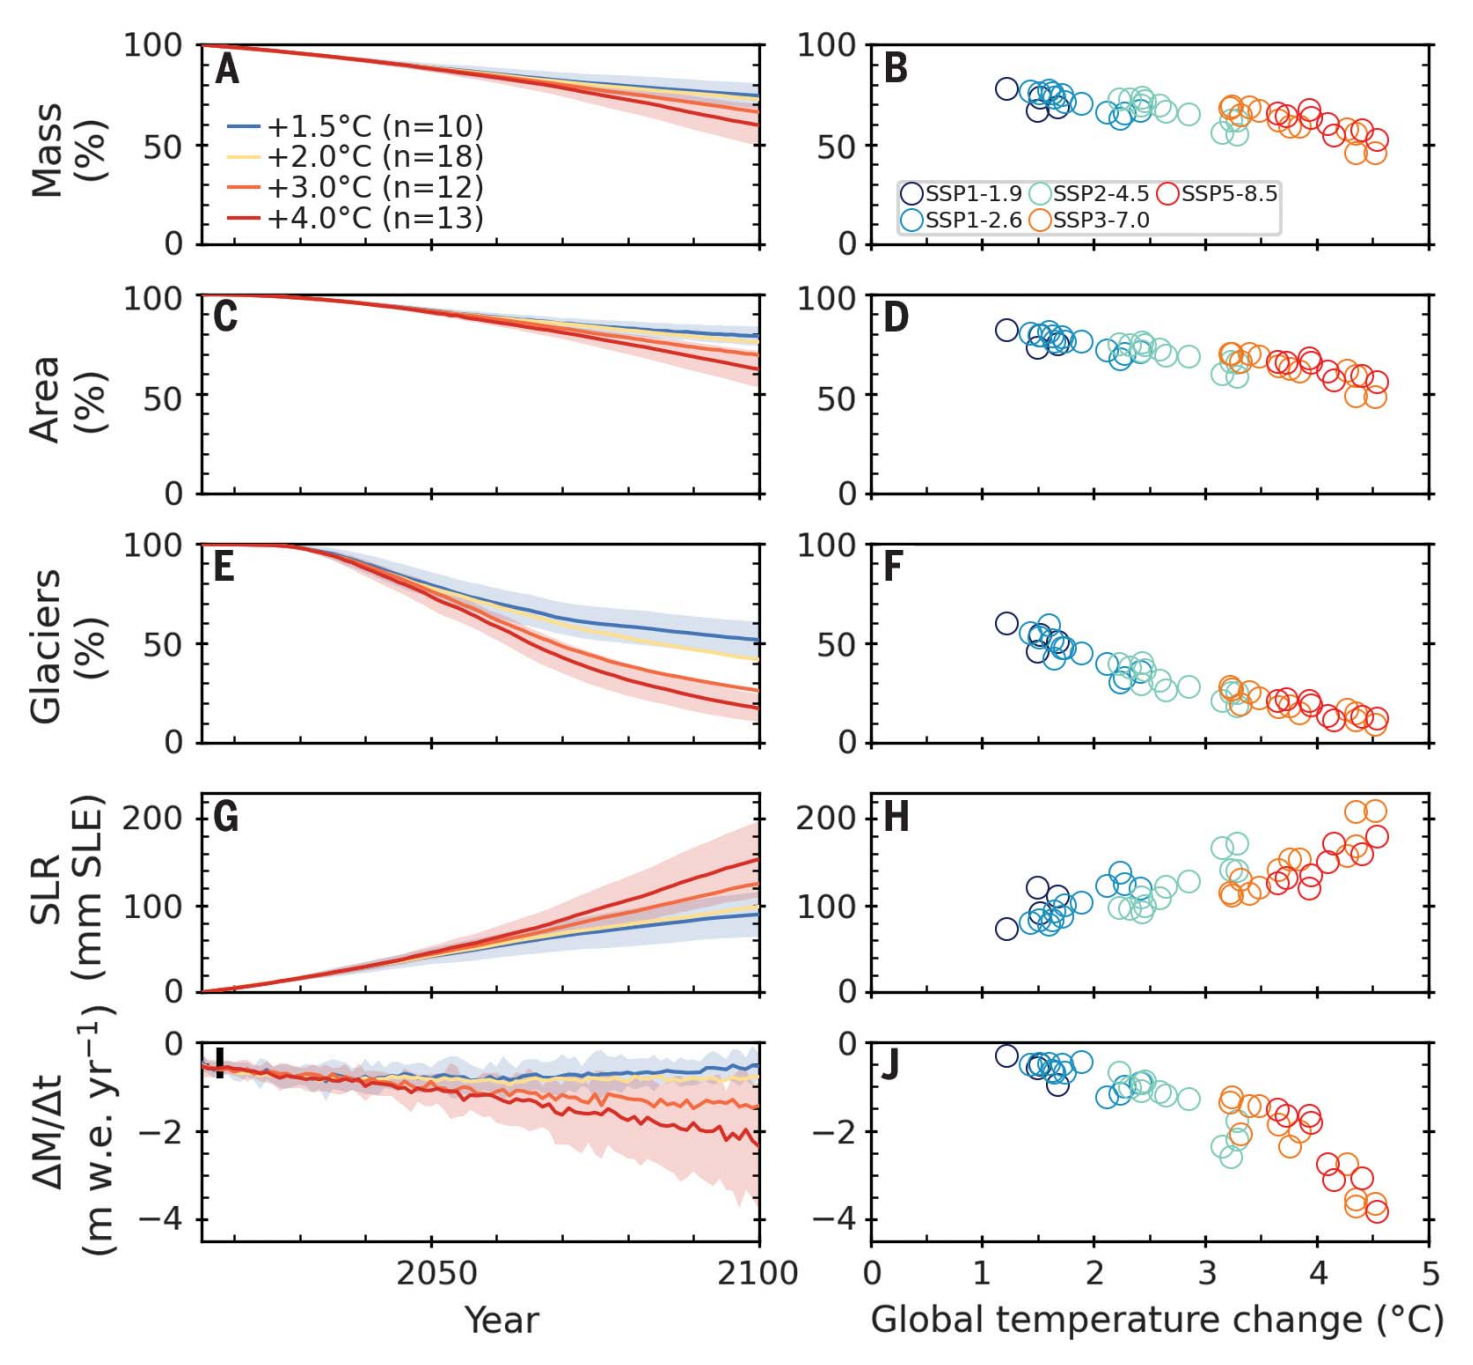 Projected global glacier changes for scenarios of global mean temperature change. (A and B) Mass remaining, (C and D) area remaining, (E and F) glaciers remaining, (G and H) sea level rise (SLR) contributed from glaciers, and (I and J) area-averaged mass change rate for all glaciers globally. Projections are shown from 2015 to 2100 (left panels), and at 2100 (right panels). Values in [(A) to (H)] are relative to 2015. Colors depict the global mean temperature change scenarios (left panels) and the SSPs corresponding to the global temperature changes (right panels). The number (n) of glacier projections with different general circulation models (GCMs) and SSPs that fall into each temperature change scenario is shown in the legend. Lines (left panels) show the ensemble median and shading indicates the 95 percent CI for each temperature change scenario. Graphic: Rounce, et al., 2022 / Science